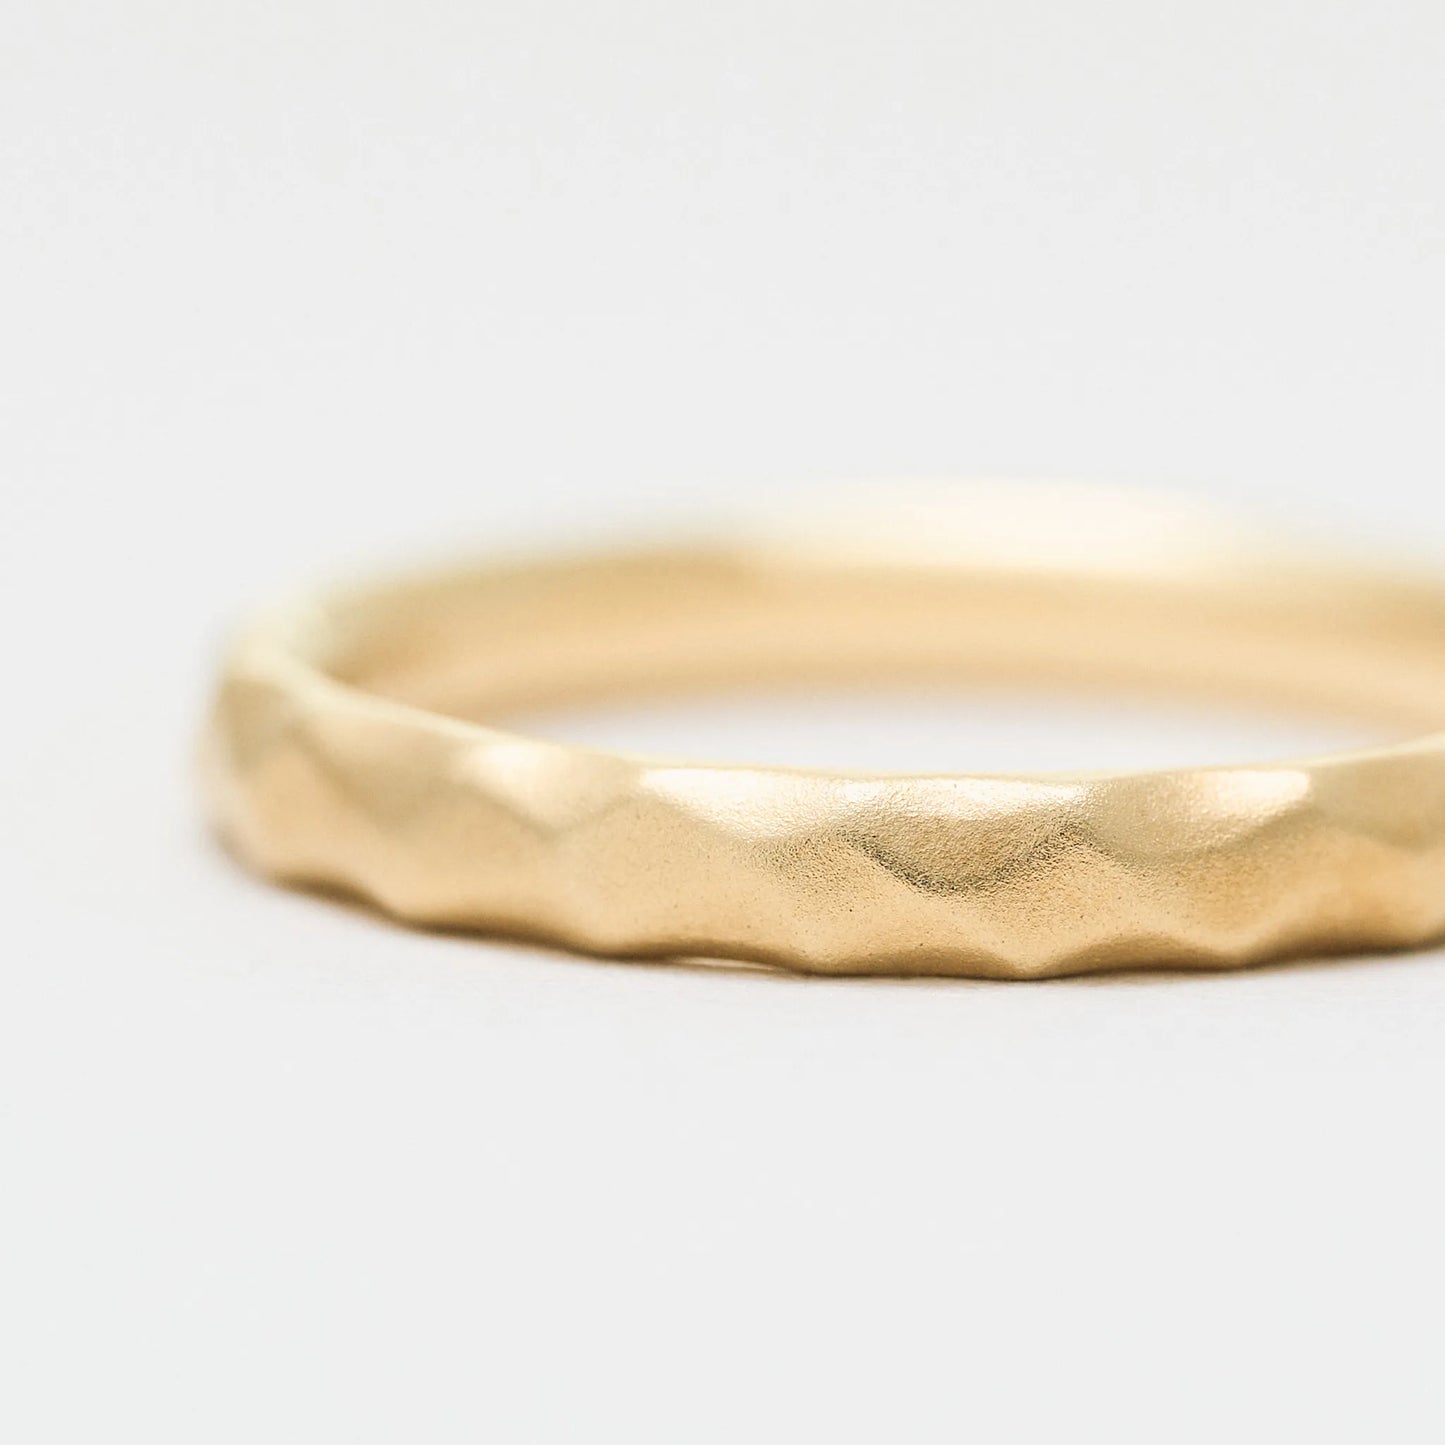 Marriage Ring_tsuchime(wide)